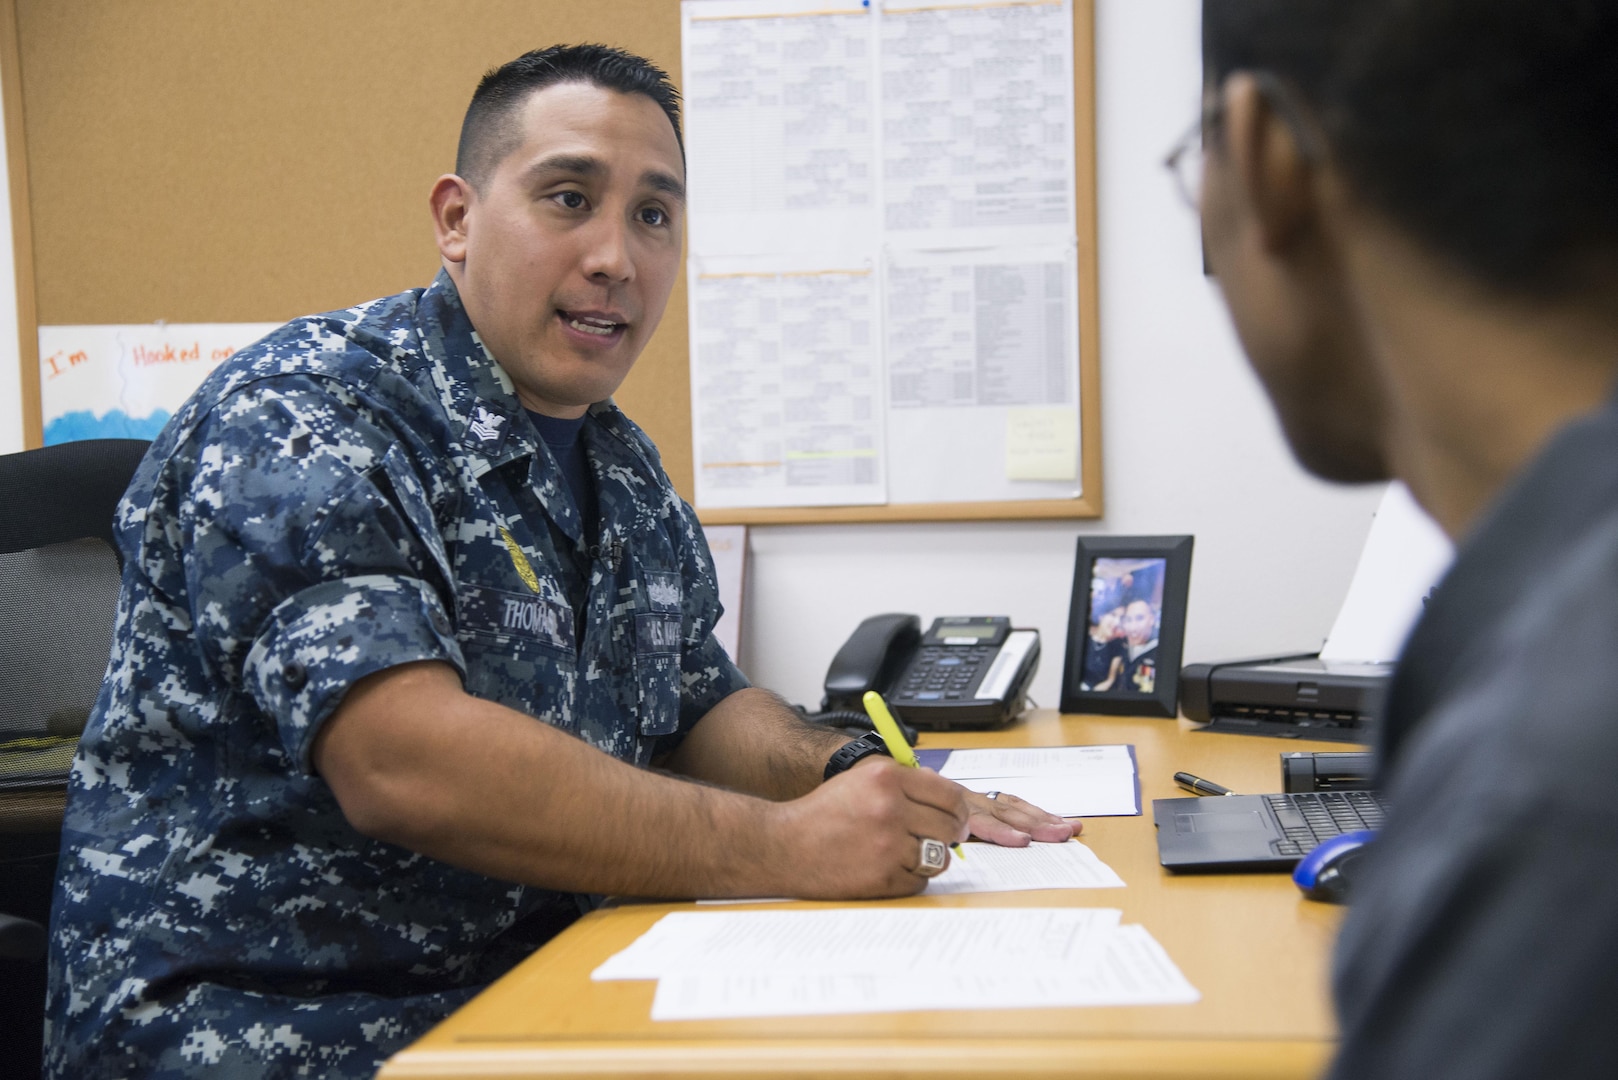 Petty Officer First Class Christopher Thomas, Navy Recruiting District San Antonio recruiter, speaks to an applicant about job opportunities in the Navy Oct. 25, 2017.  Thomas’ mission is to find officer applicants to lead naval forces in conducting operations on land, air and sea.  (U.S. Air Force photo by Sean M. Worrell)